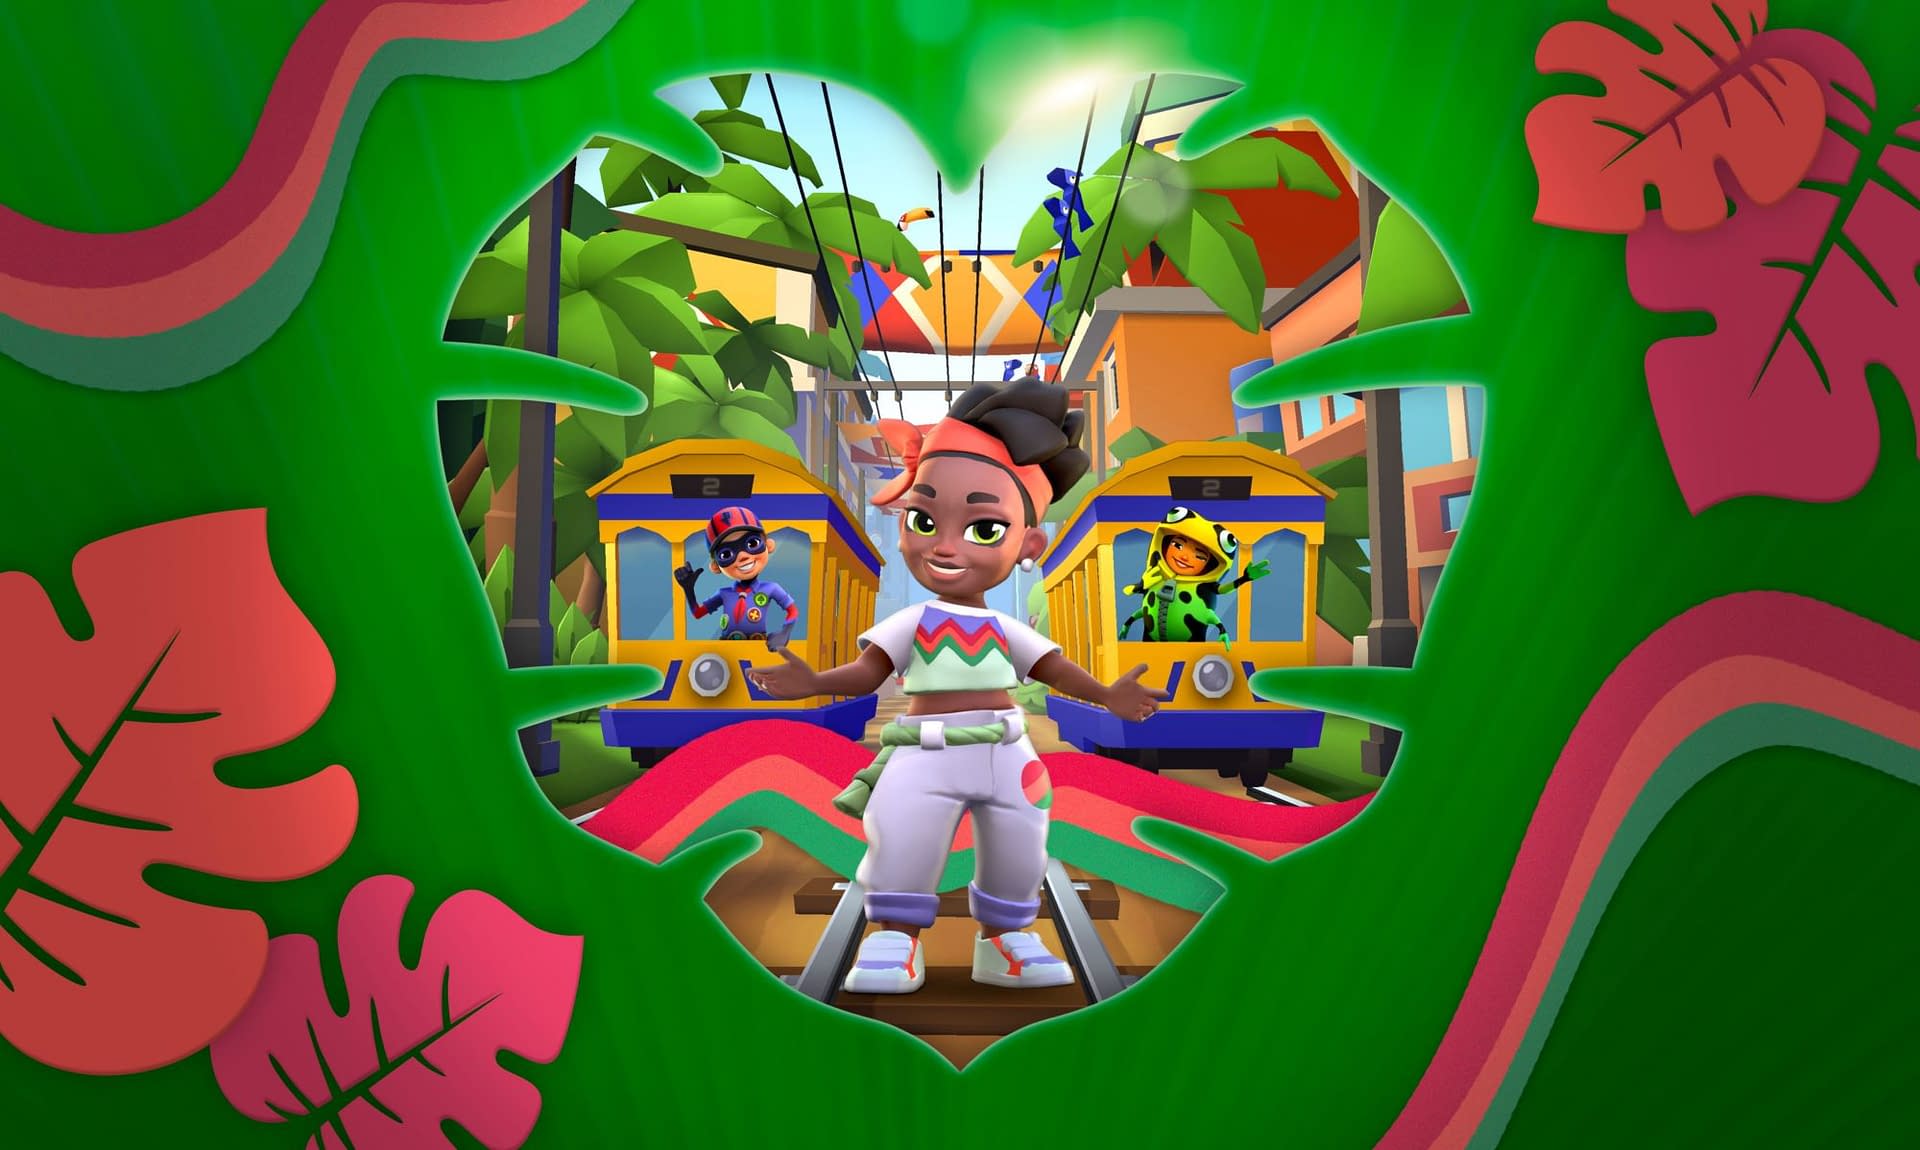 Subway Surfers App Gifts Gamers Exclusive Reveal of New Animated